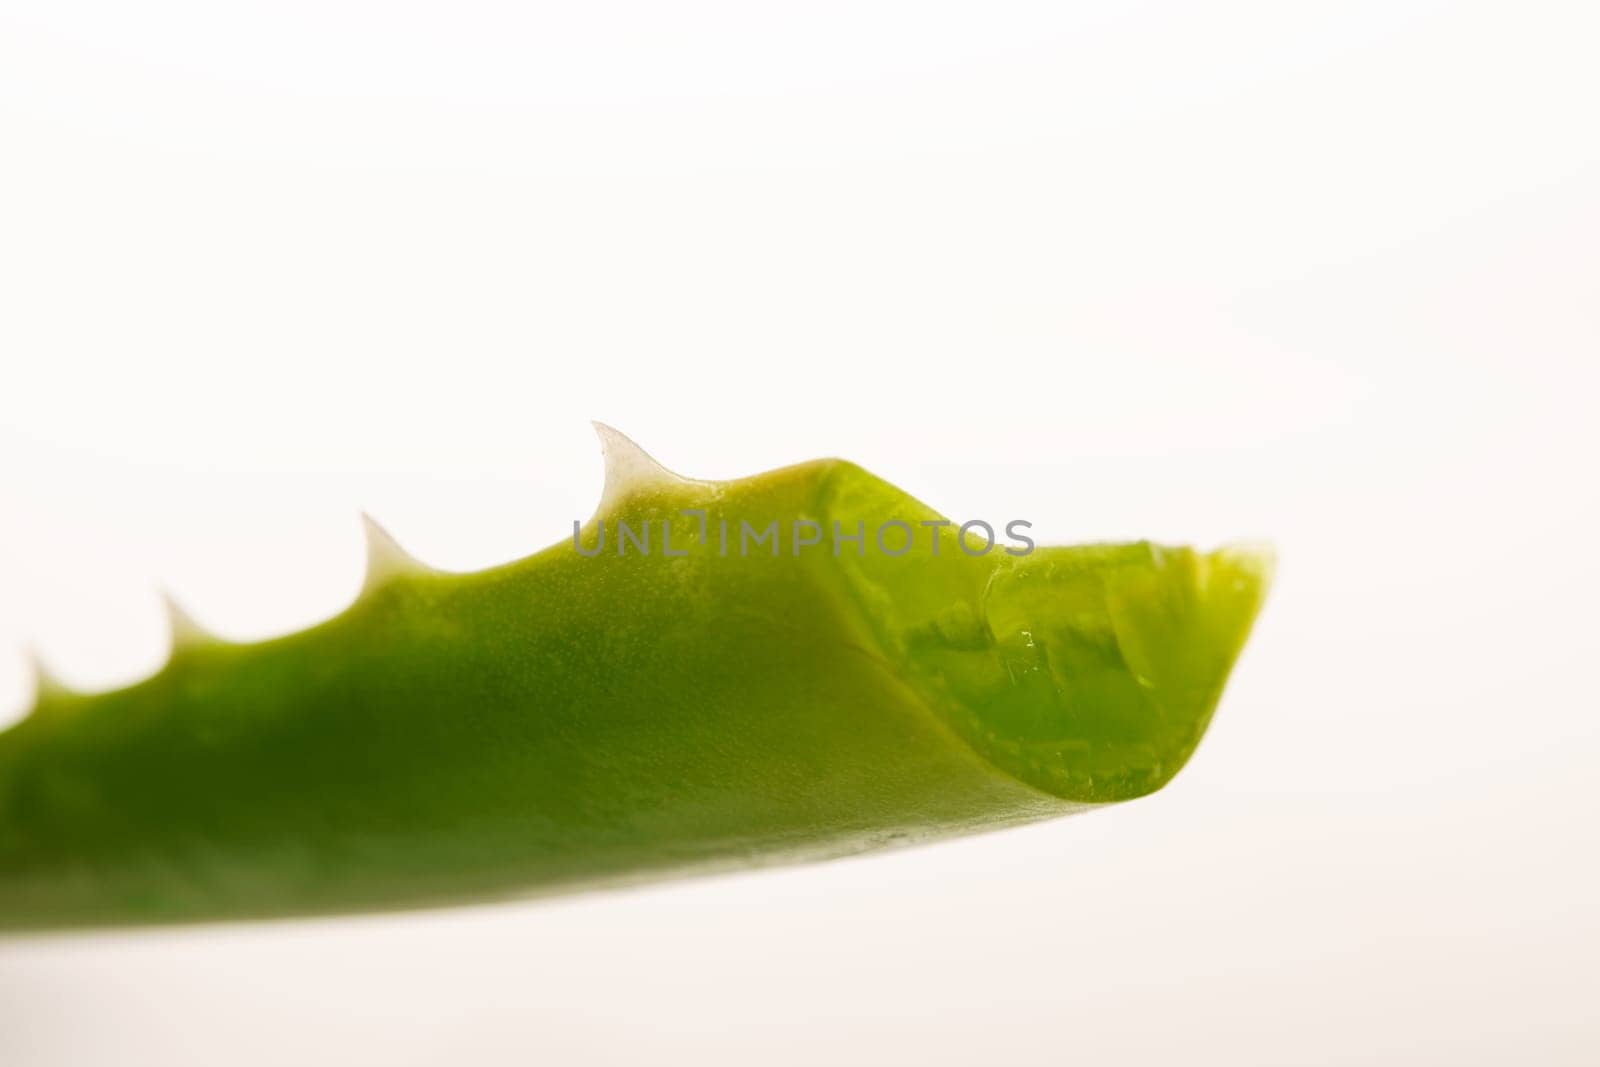 close-up of a cut aloe vera branch isolated on a white background